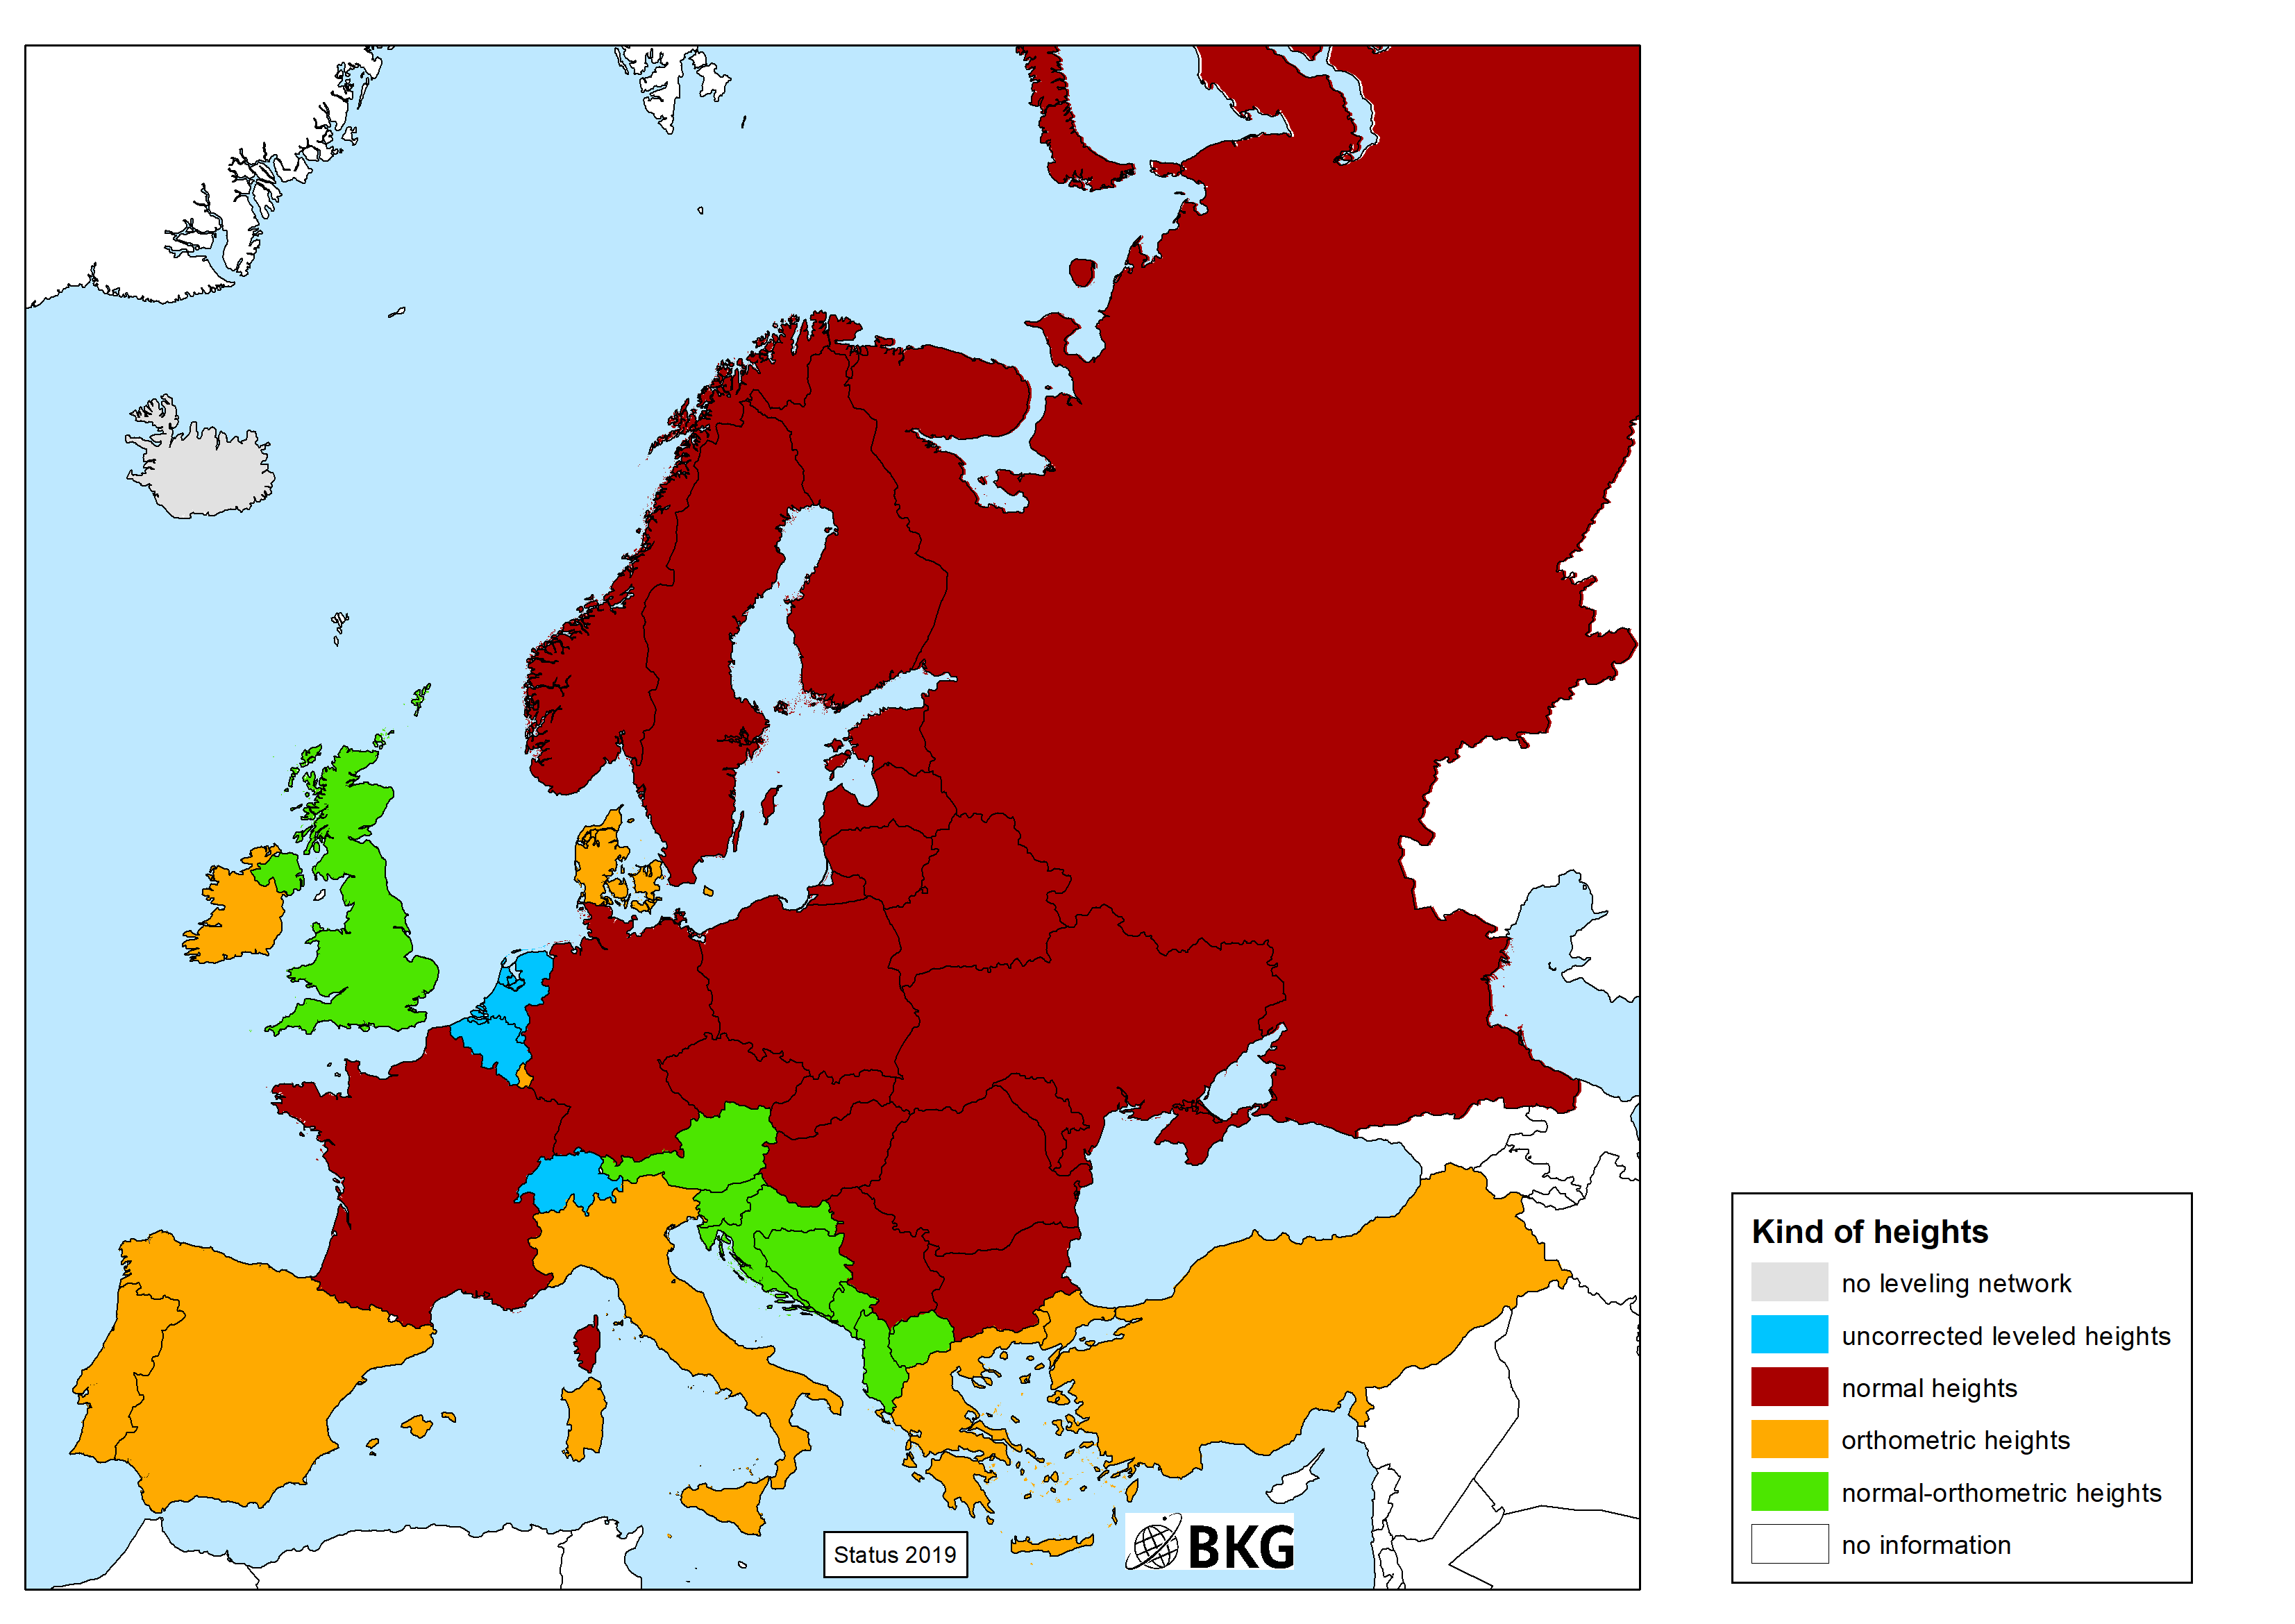 Picture shows a map of European countries where different colours represent the kind of heights of national height systems in Europe